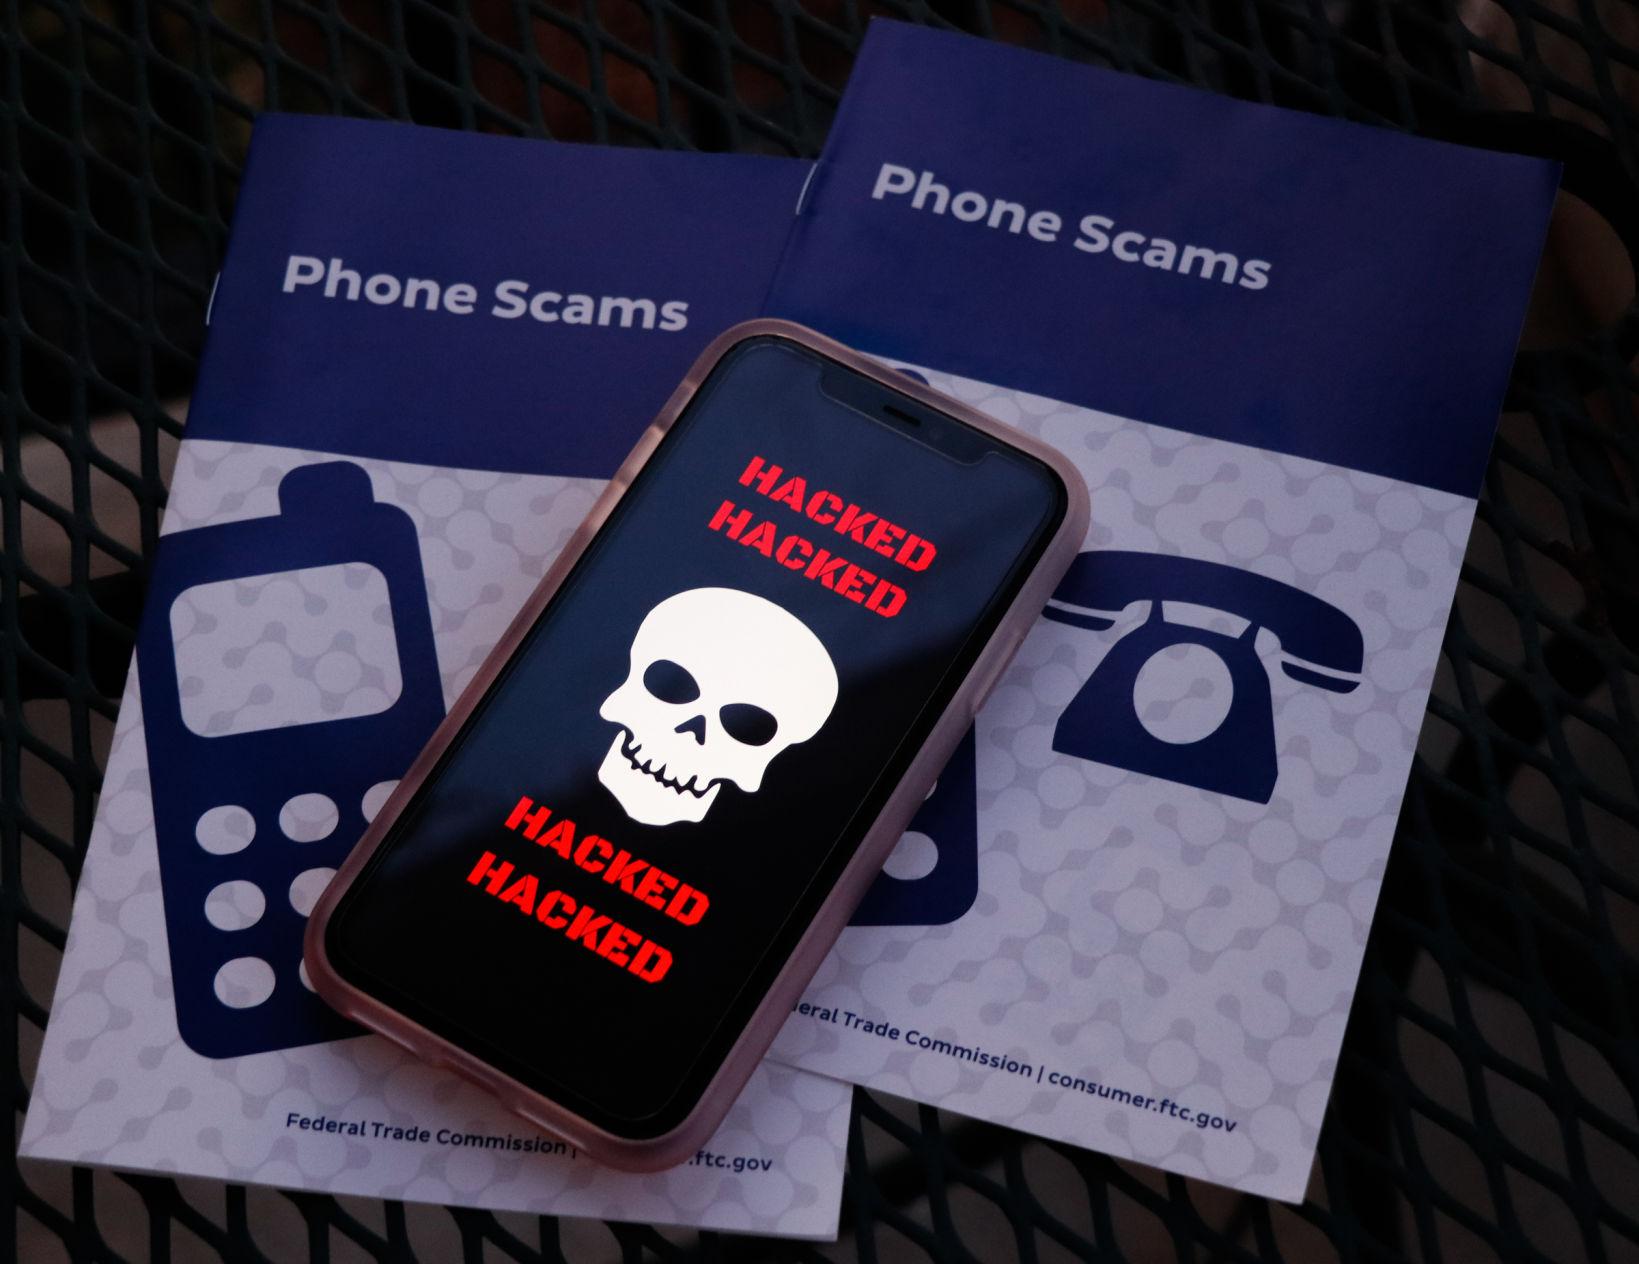 Graphic of a phone that reads 'Hacked' on top of scamming brochures